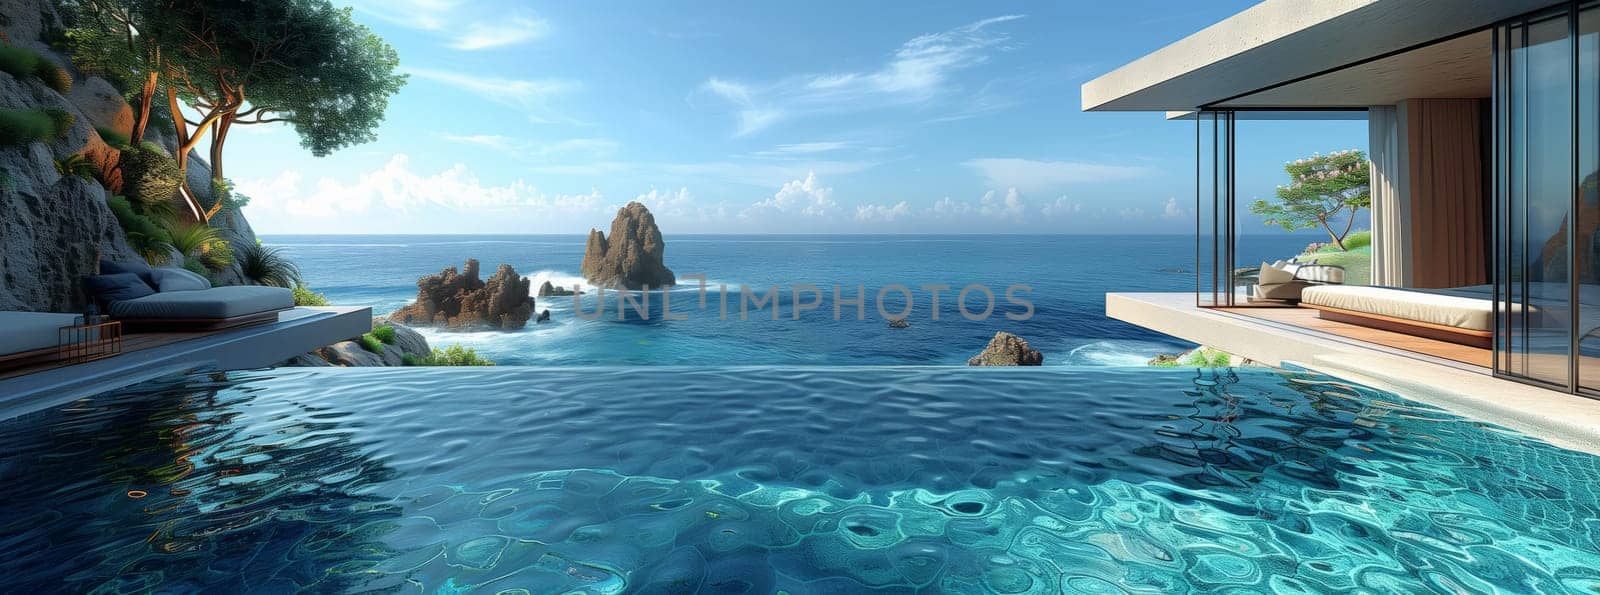 an artist s impression of an infinity pool overlooking the ocean by richwolf